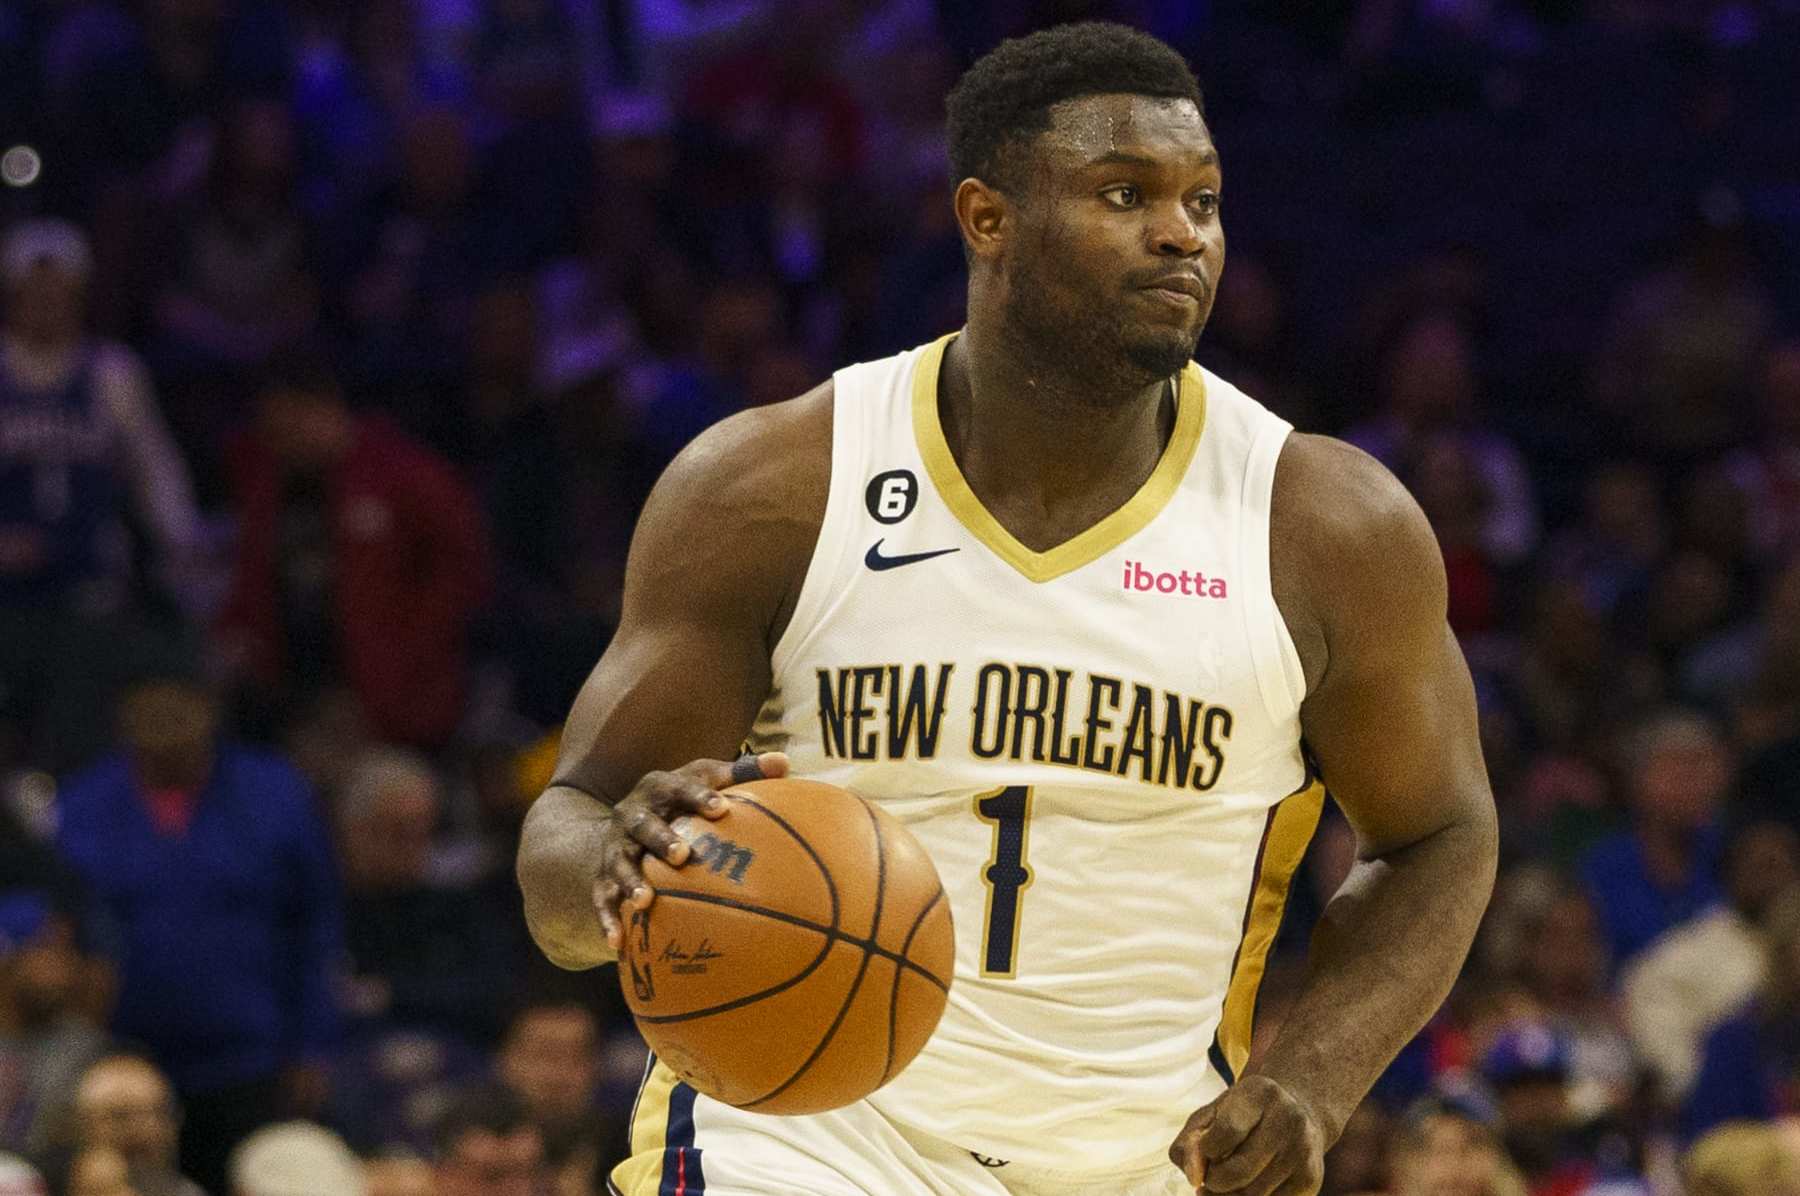 Zion Williamson is available as NBA teams eye pre-Draft trade